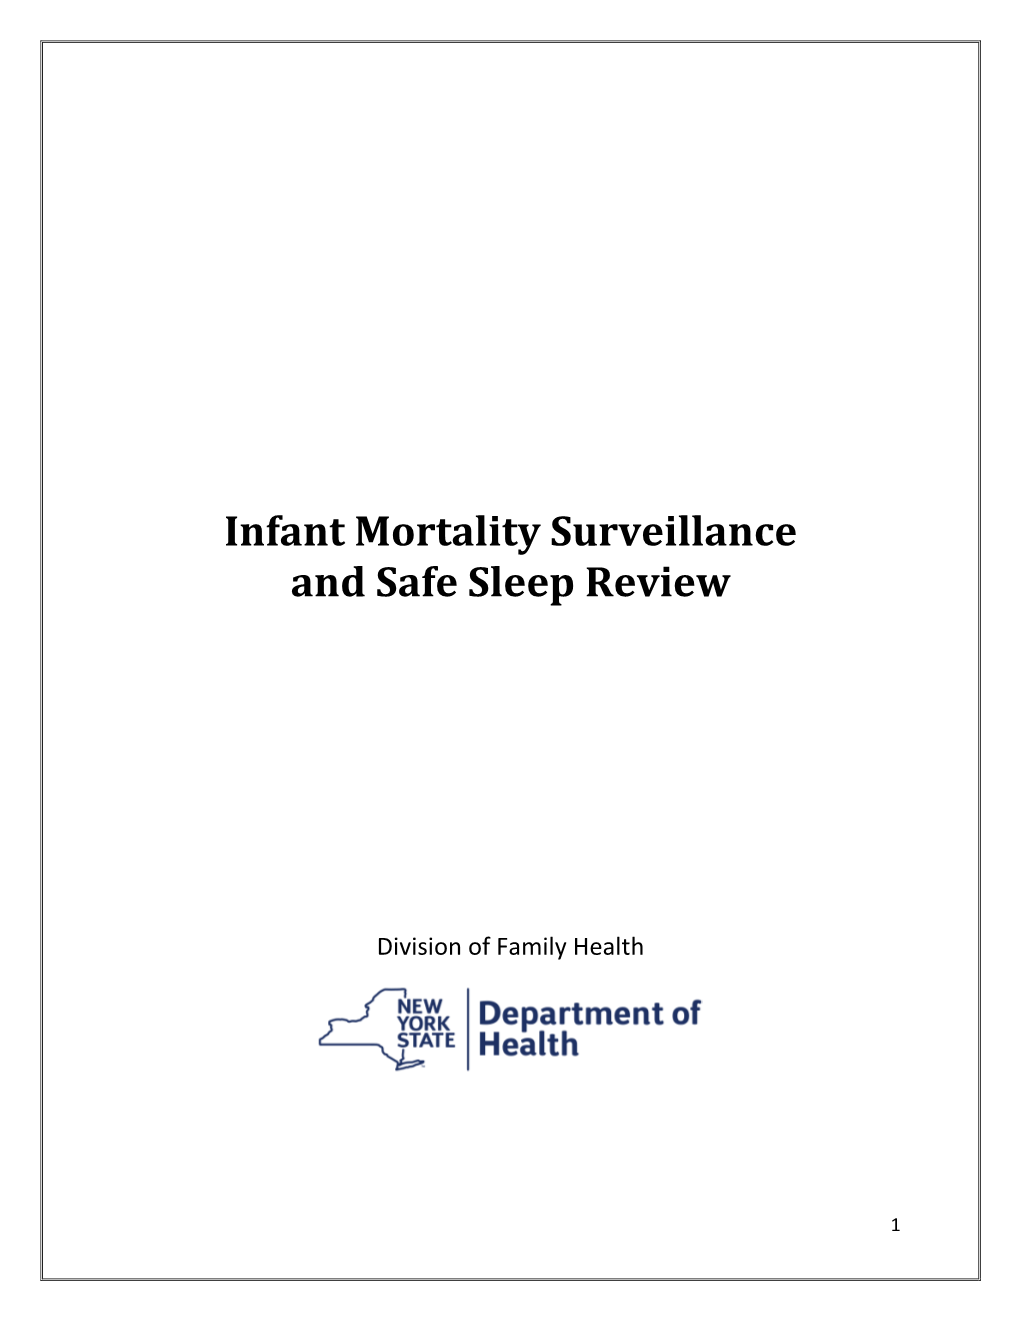 Infant Mortality Surveillance and Safe Sleep Review